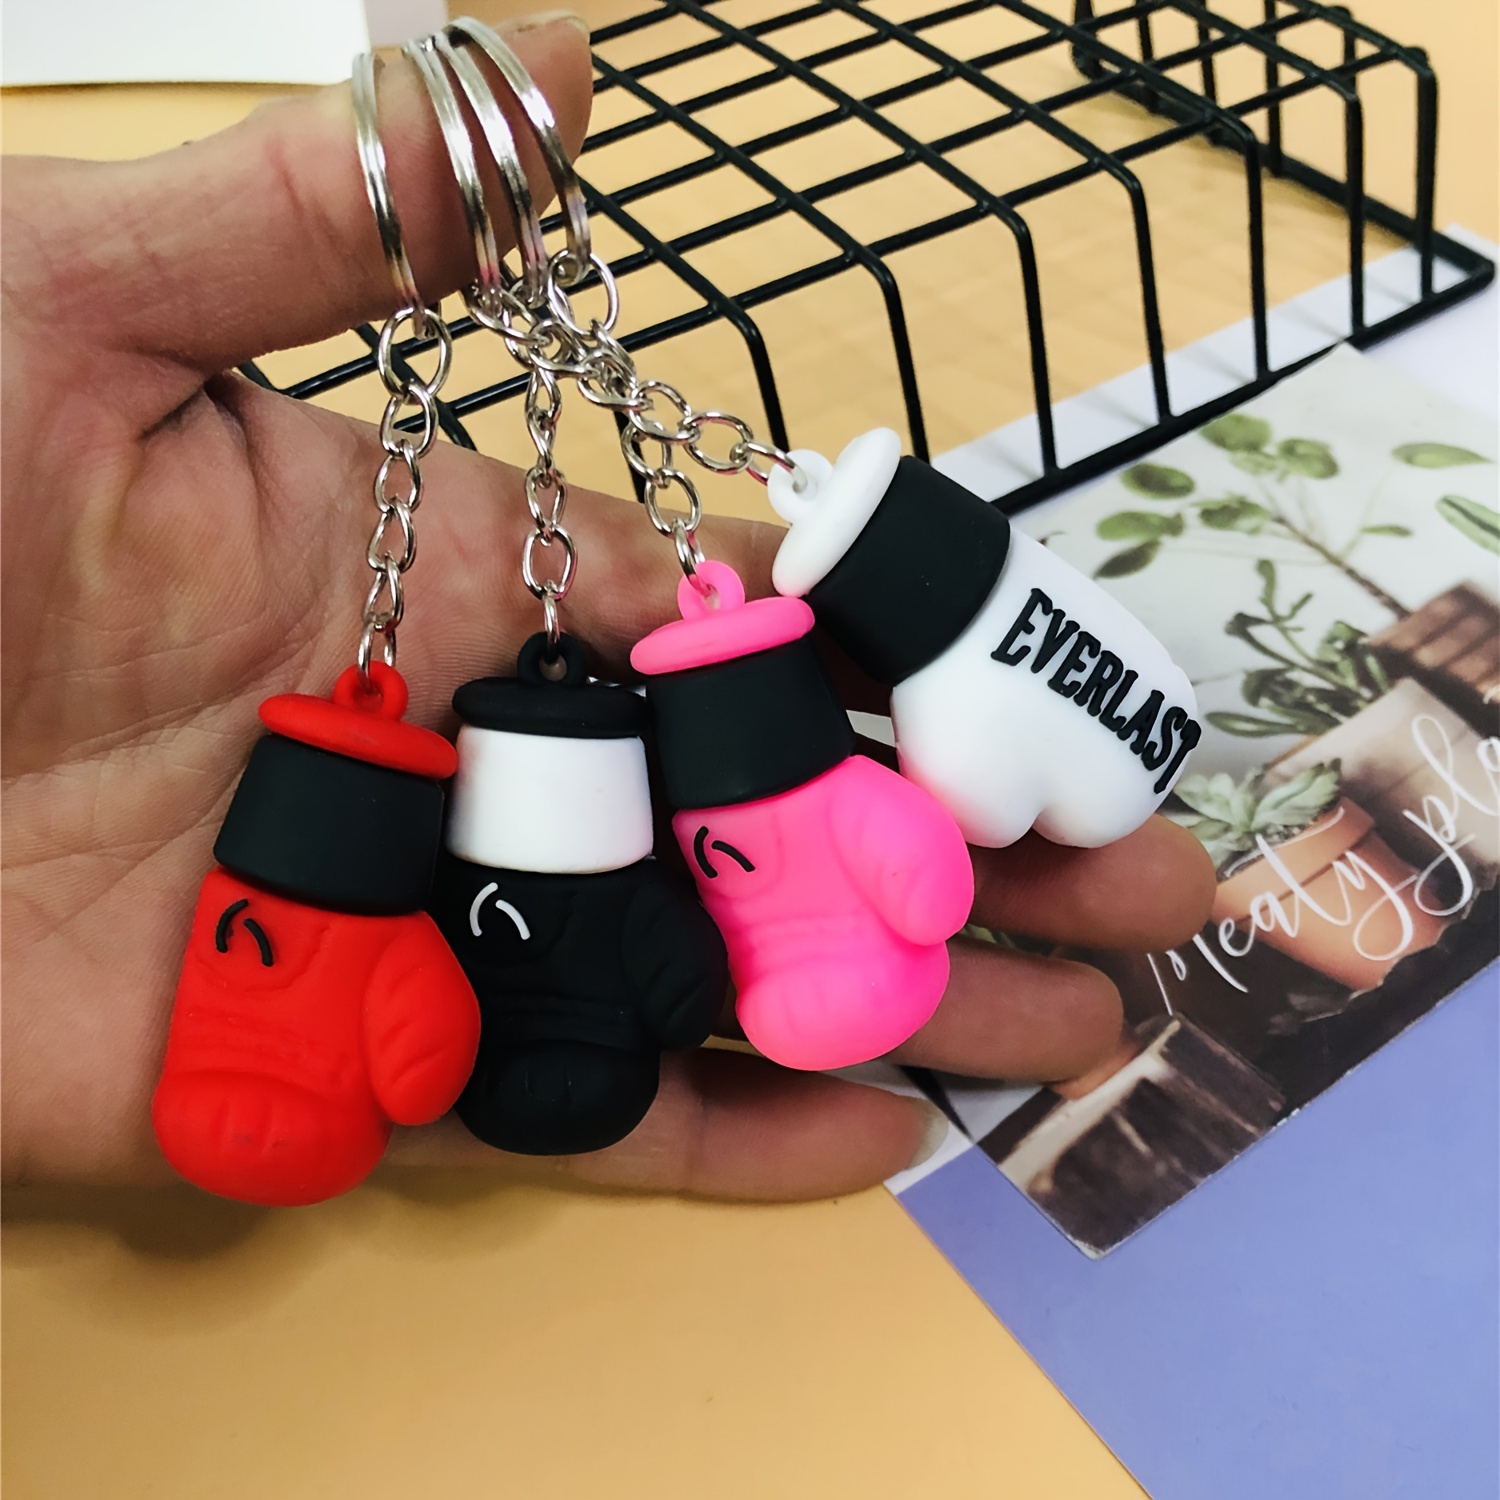 BRAND NEW LITTLE GIFTS BOXER KEY CHAIN CHARMS